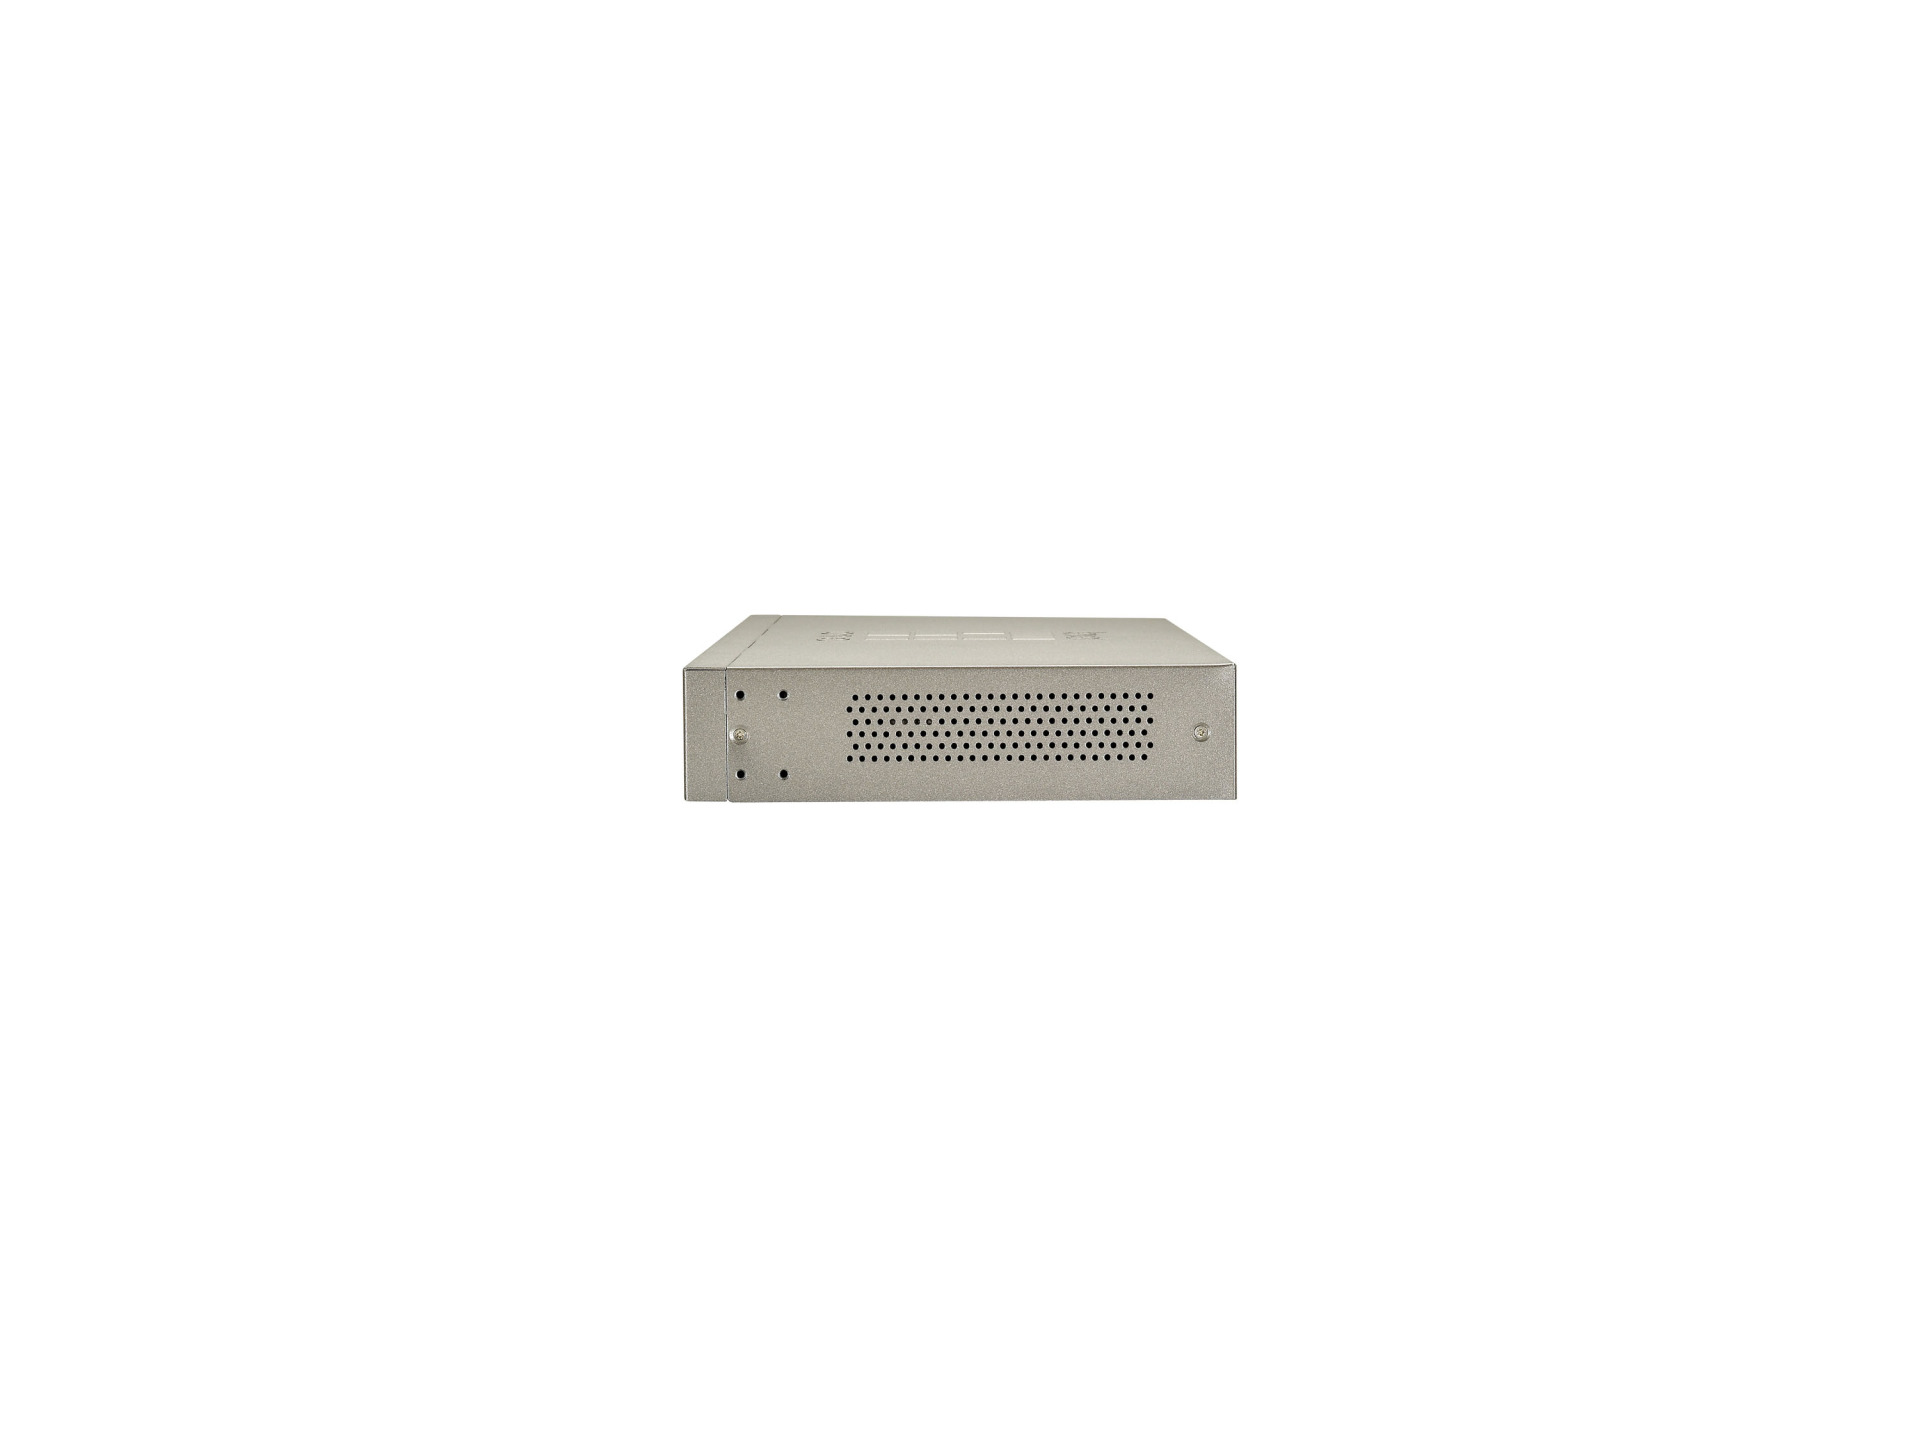 16-Port Fast Ethernet Switch